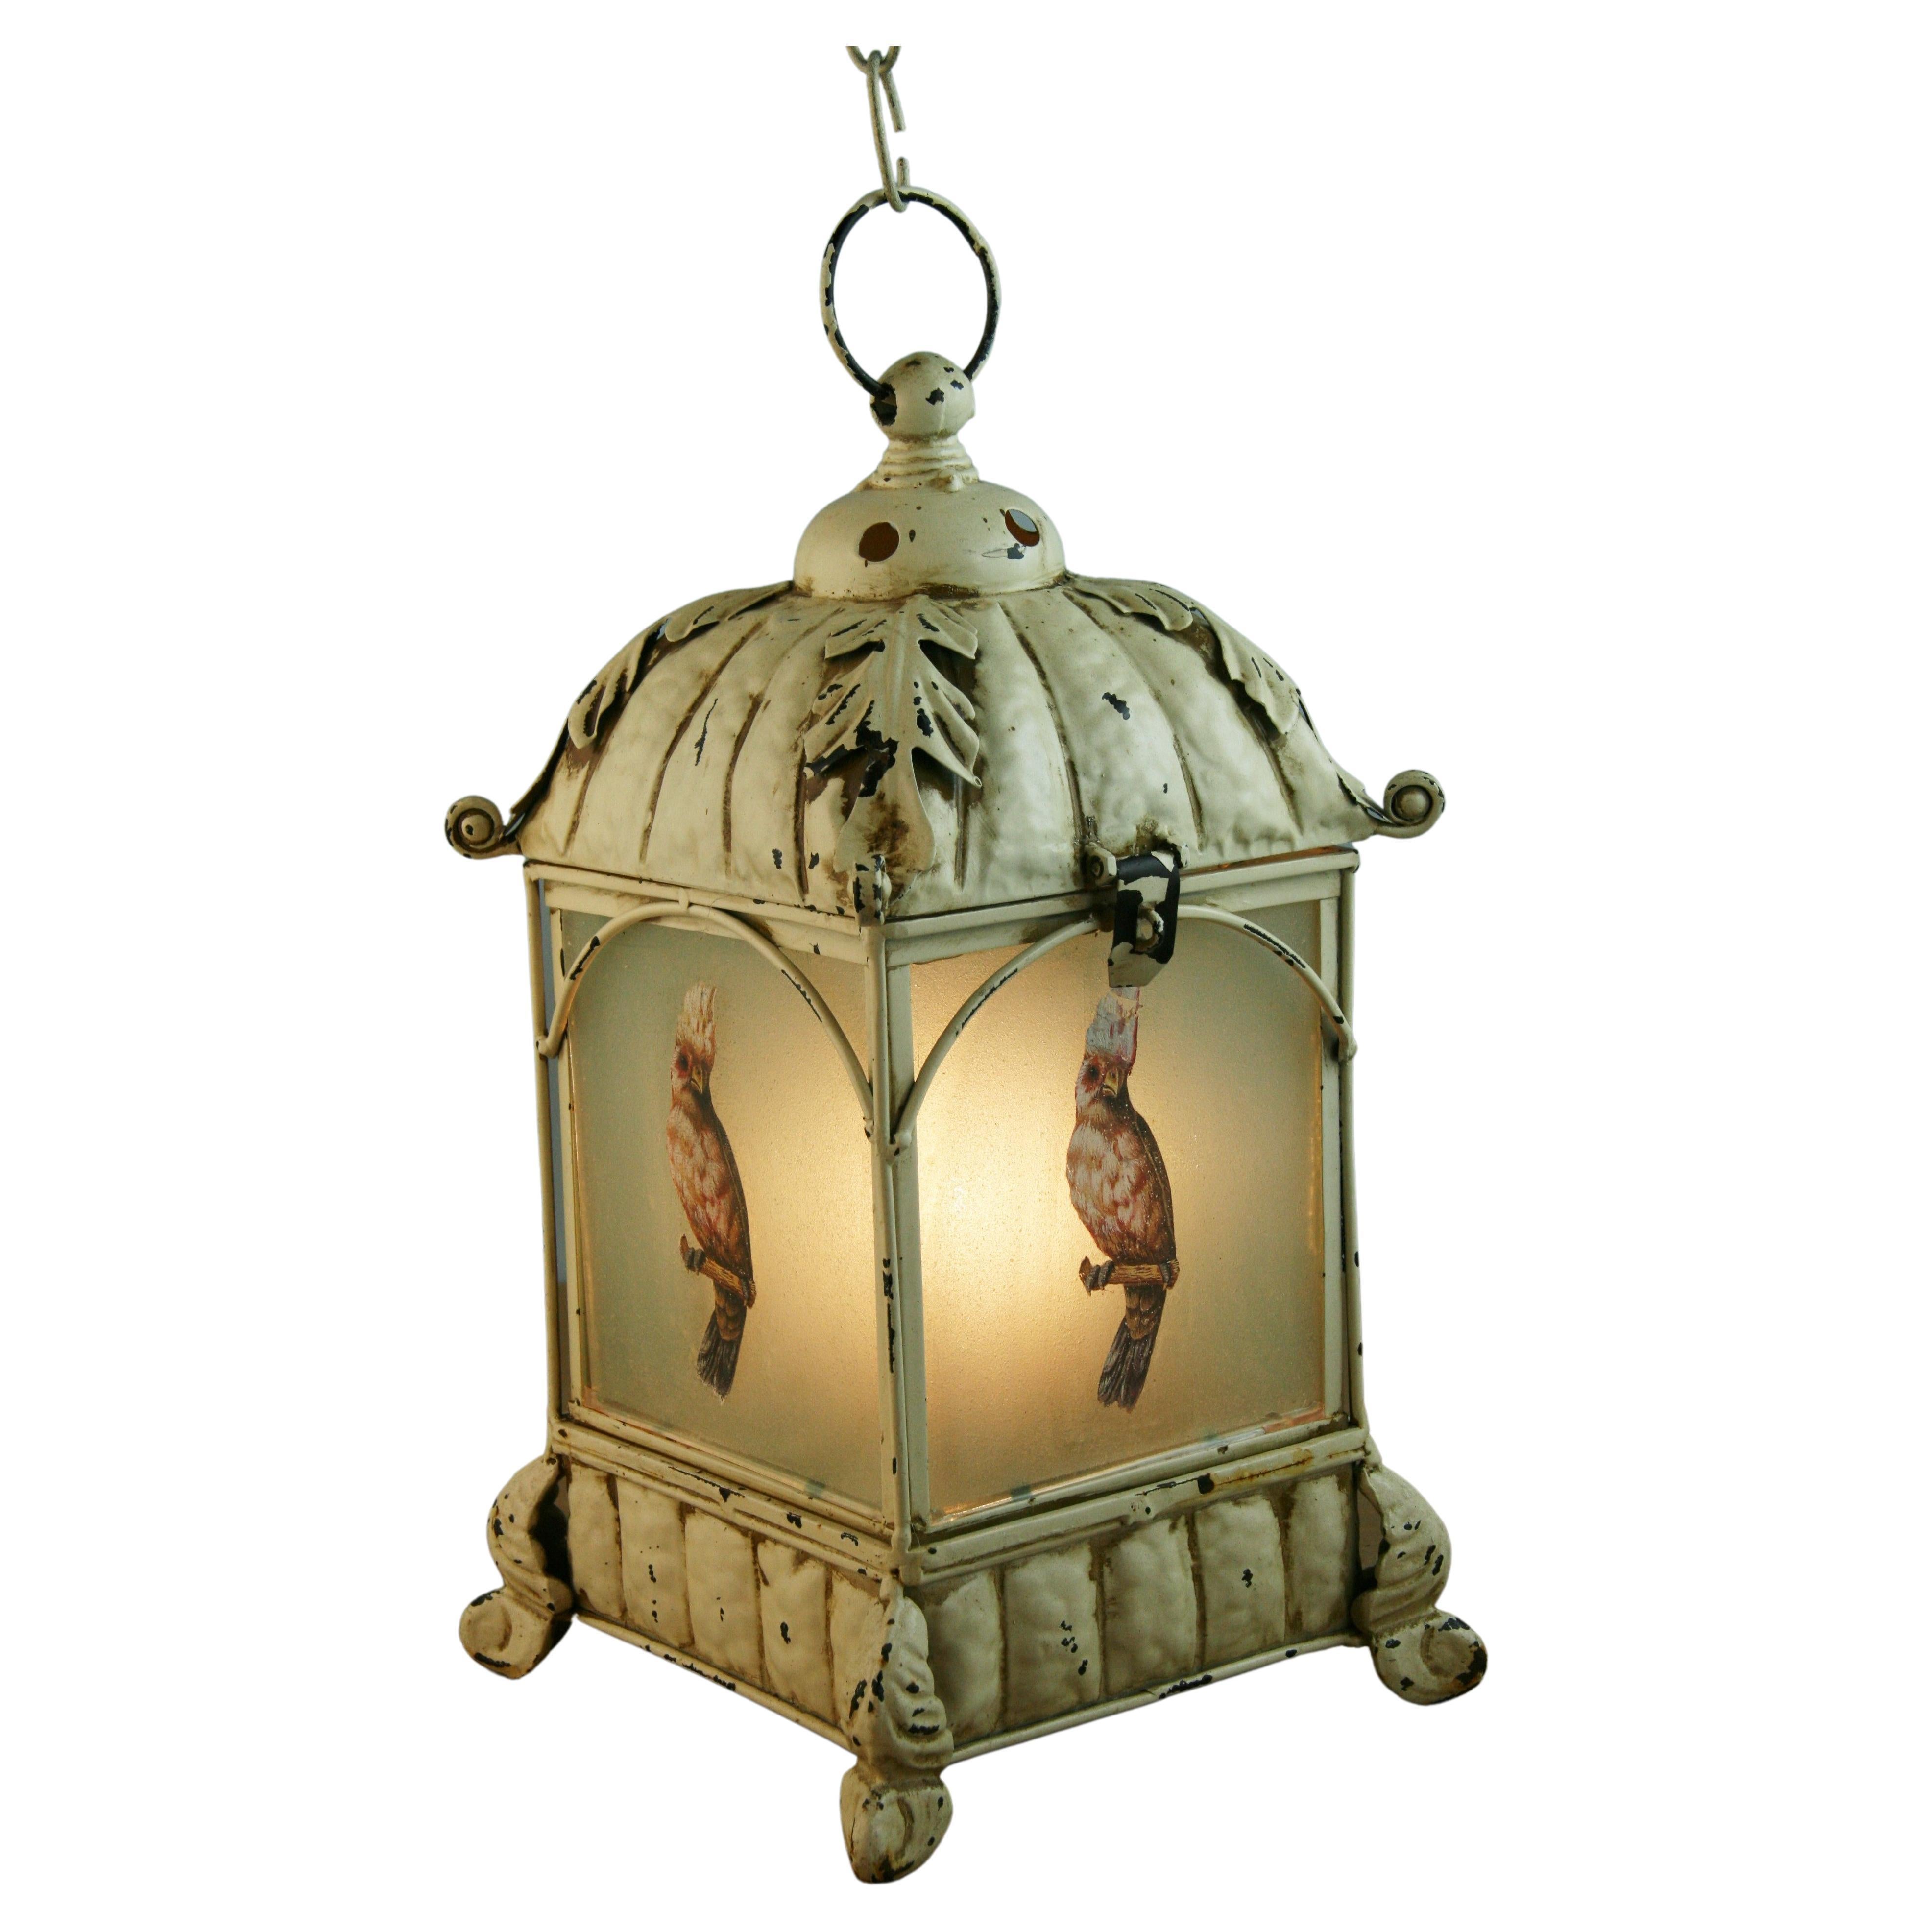 Ornate Lantern with Parrot Decorated Glass with Chain For Sale